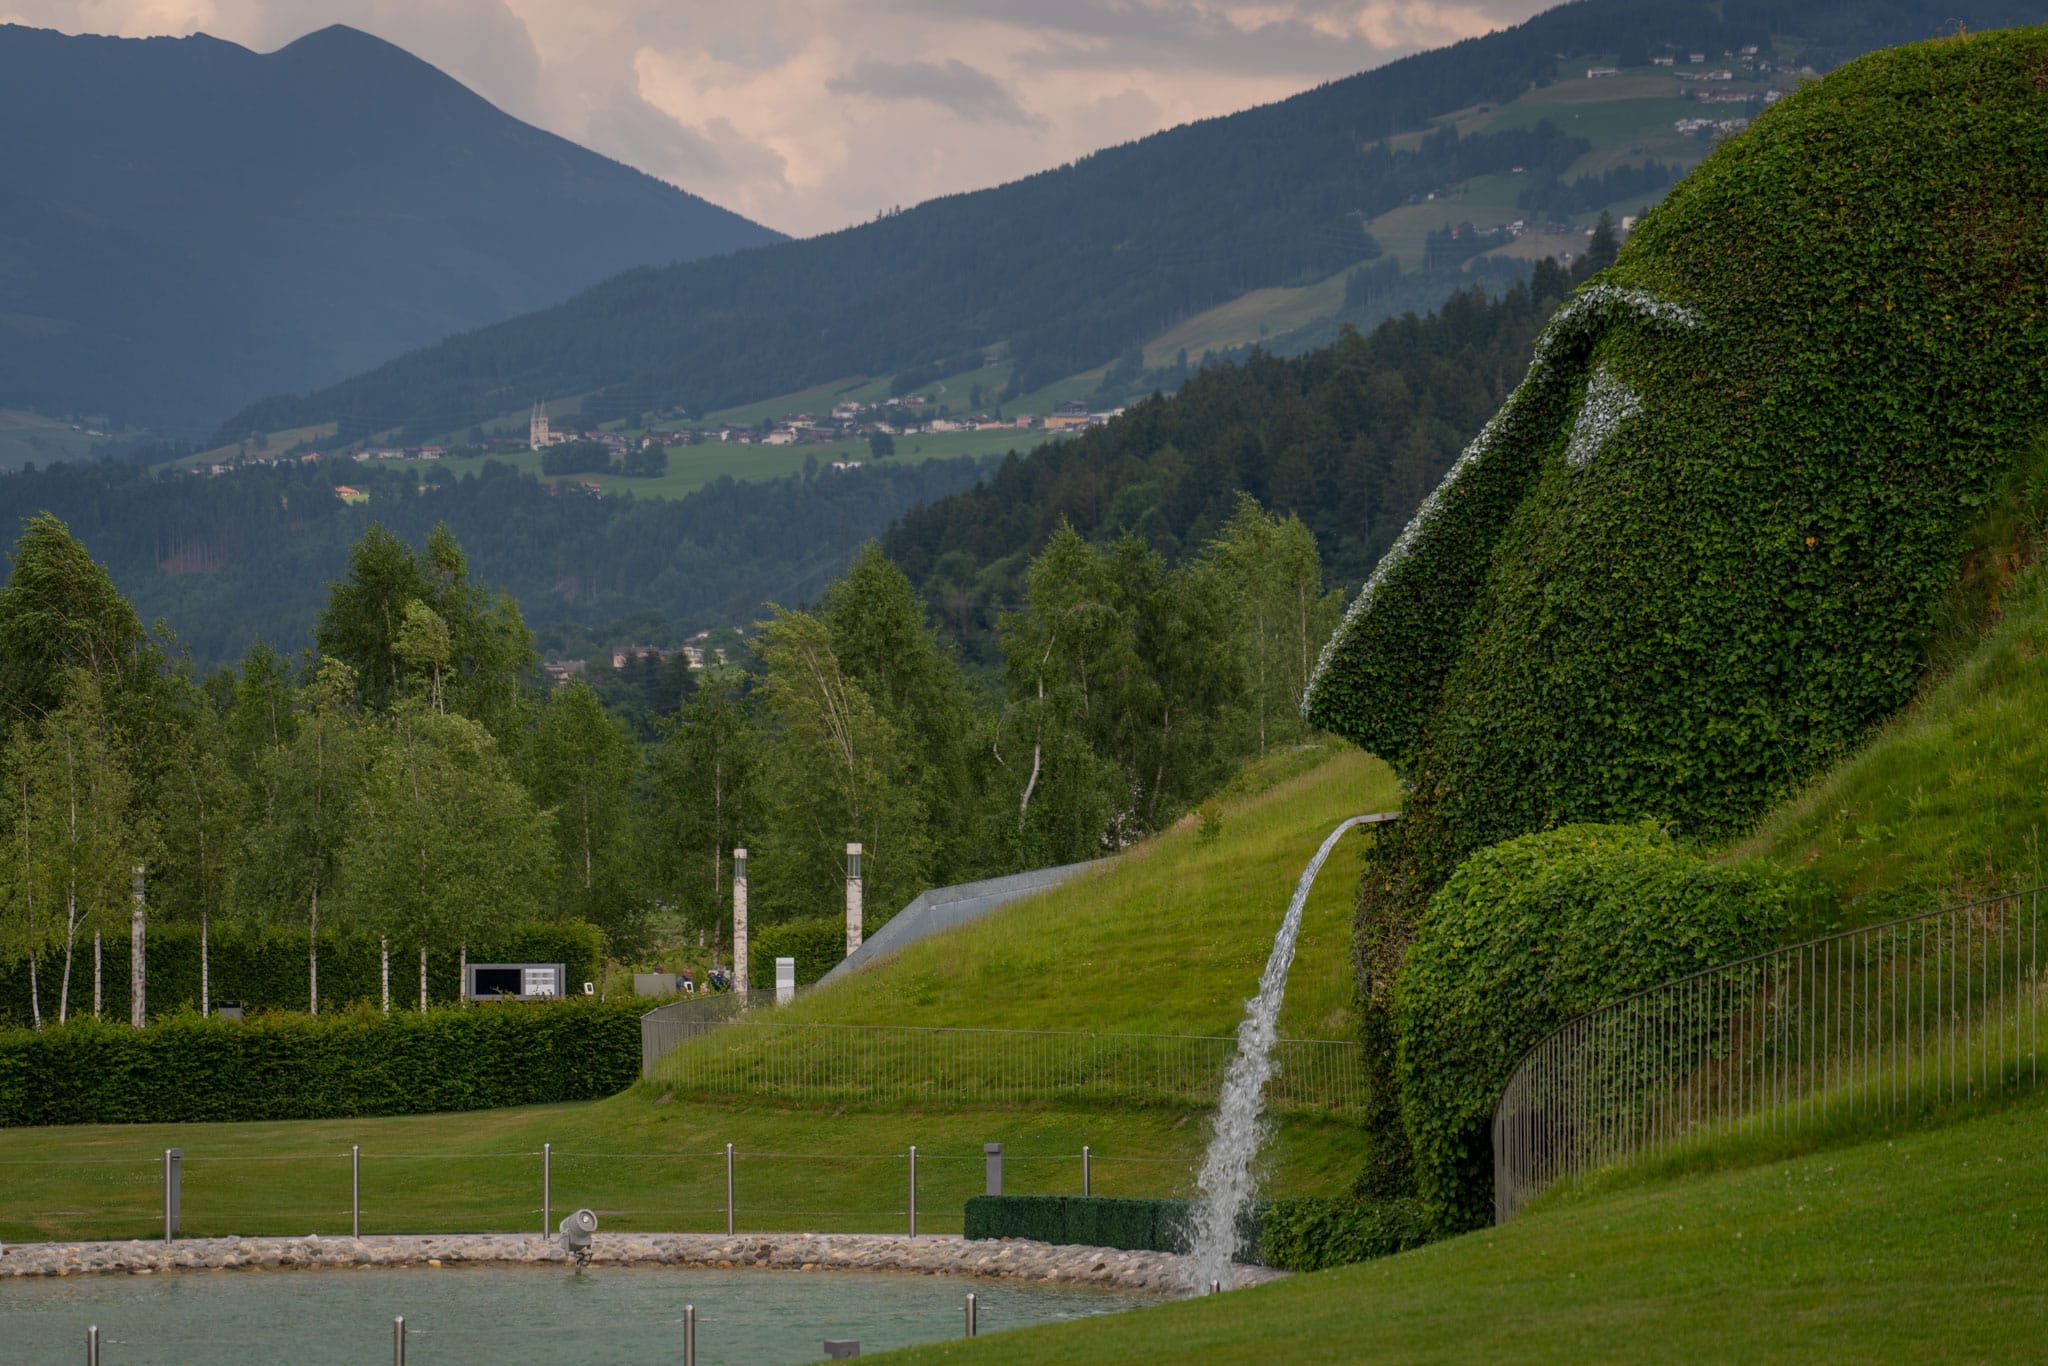 A view of a giant face with a fountain at Swarovski Kristallwelten